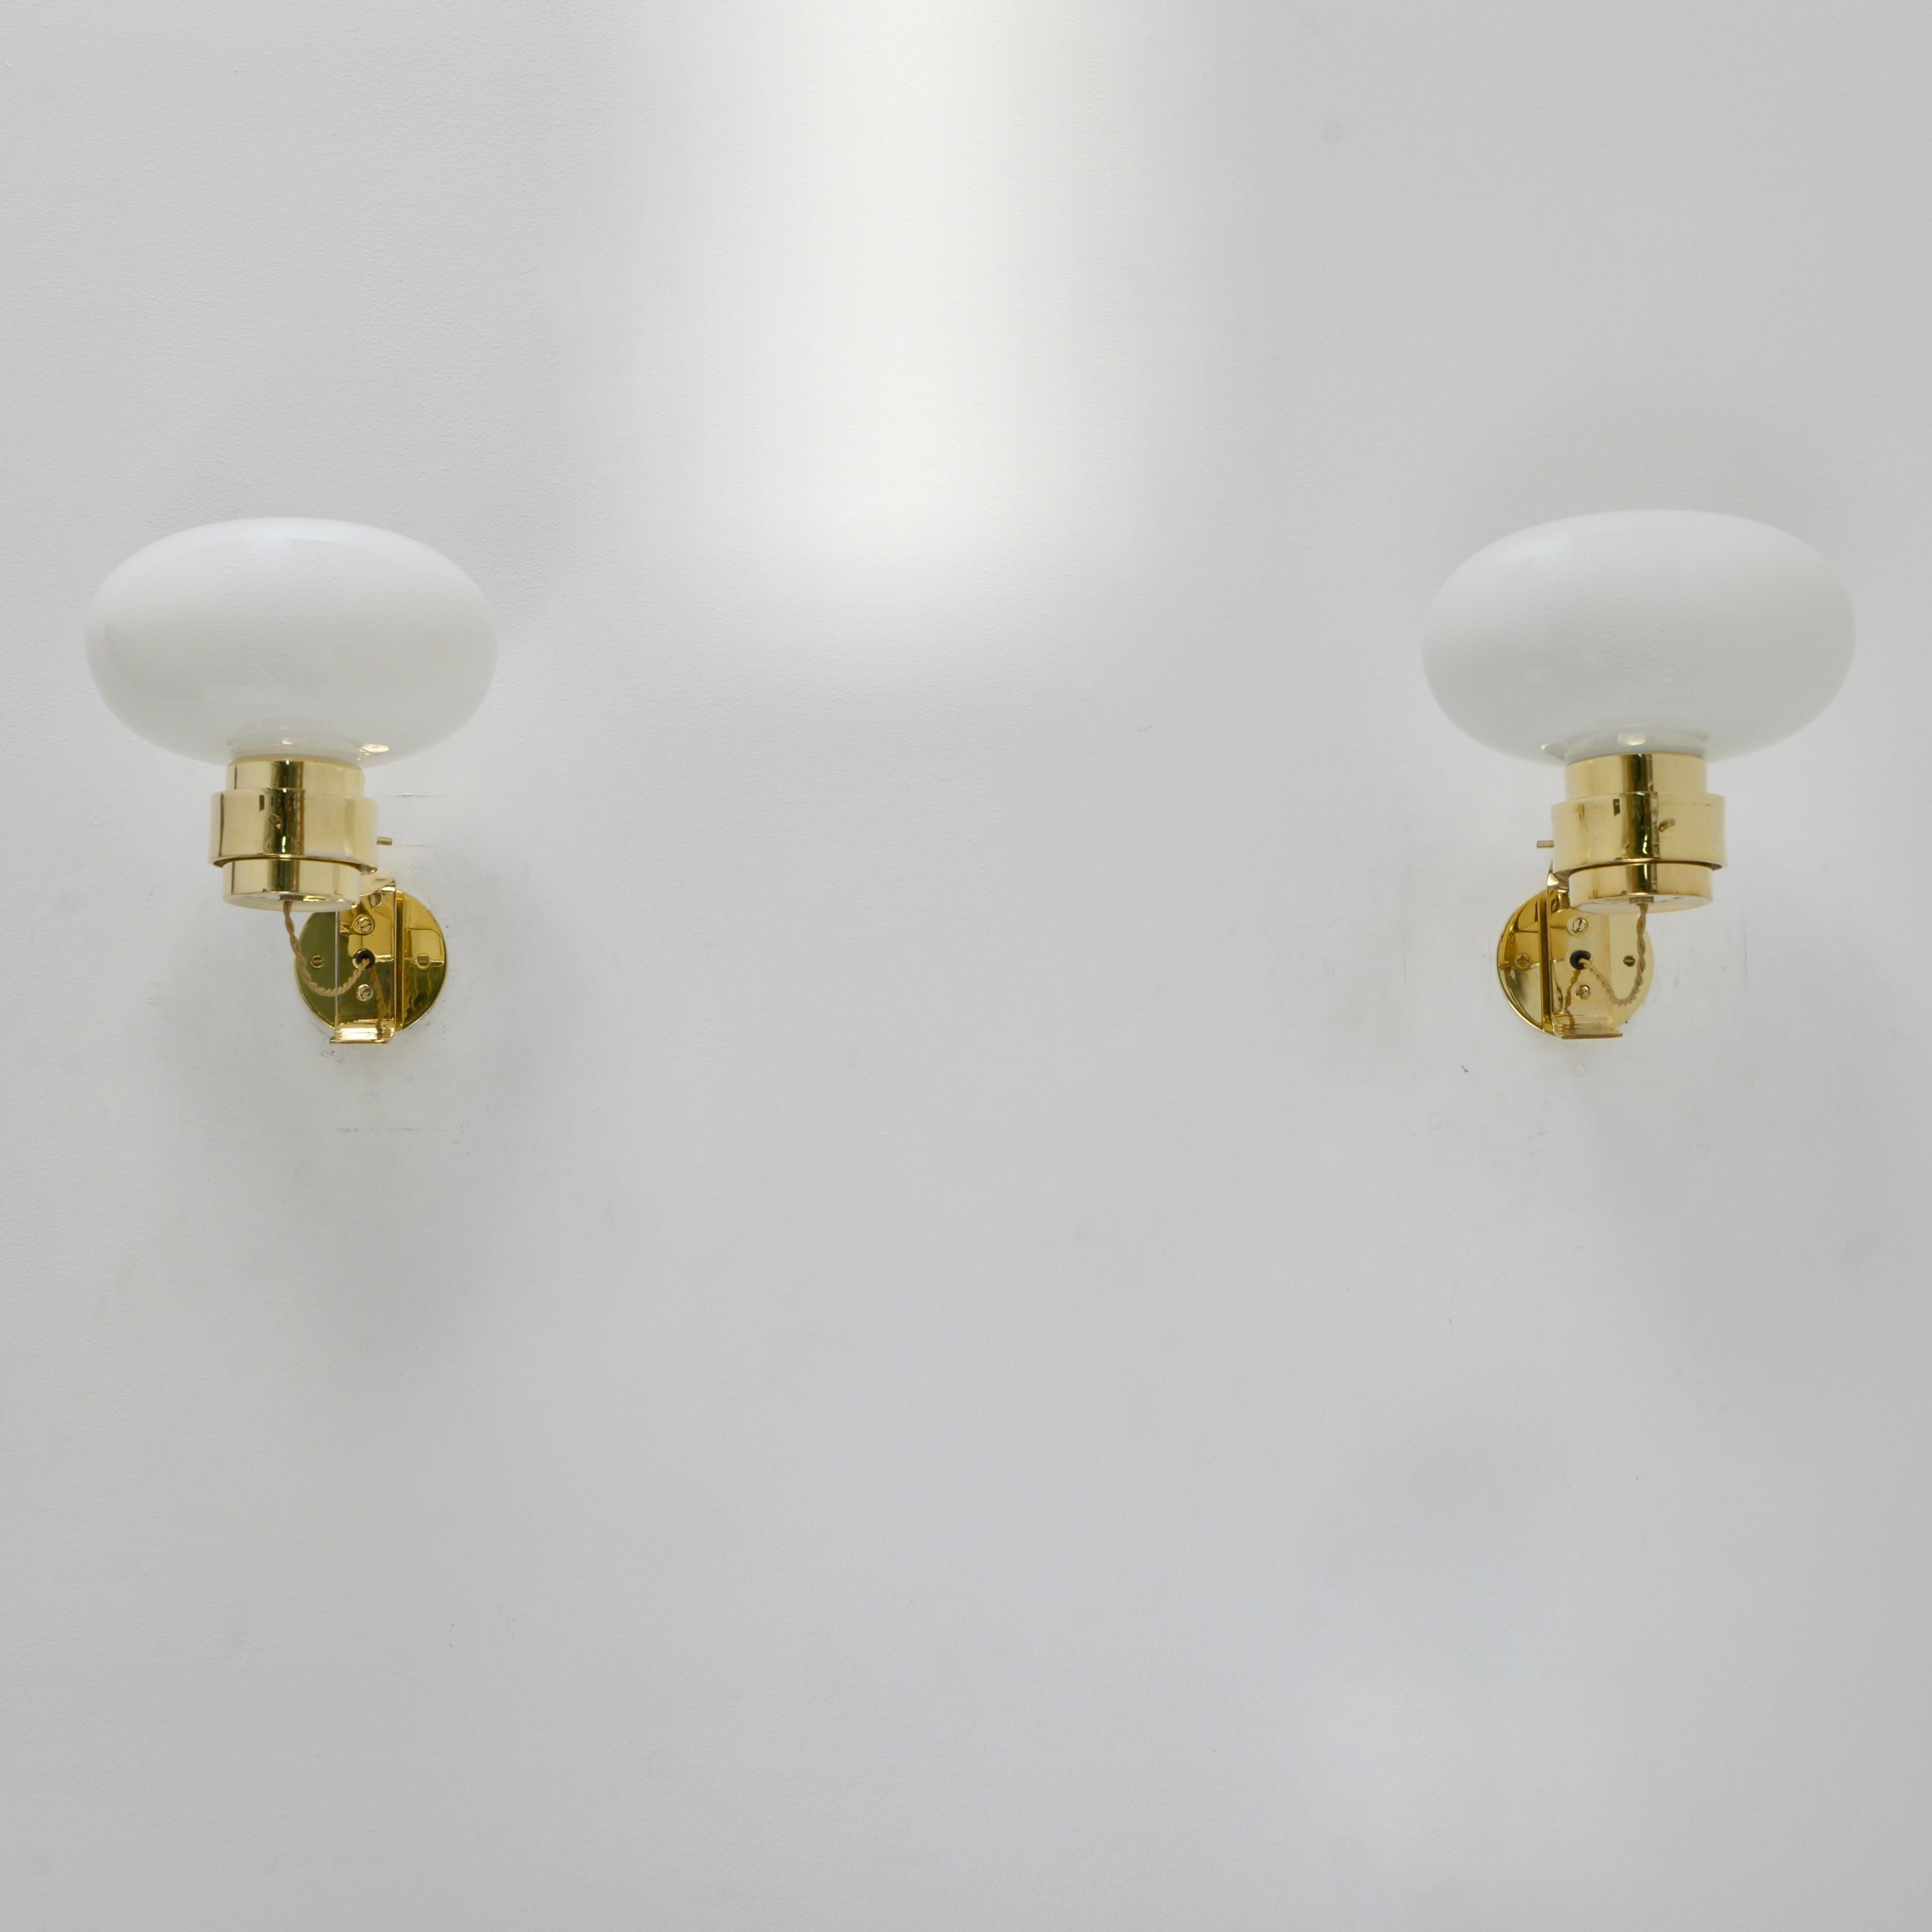 Pair of Martinelli Luce Sconces 1